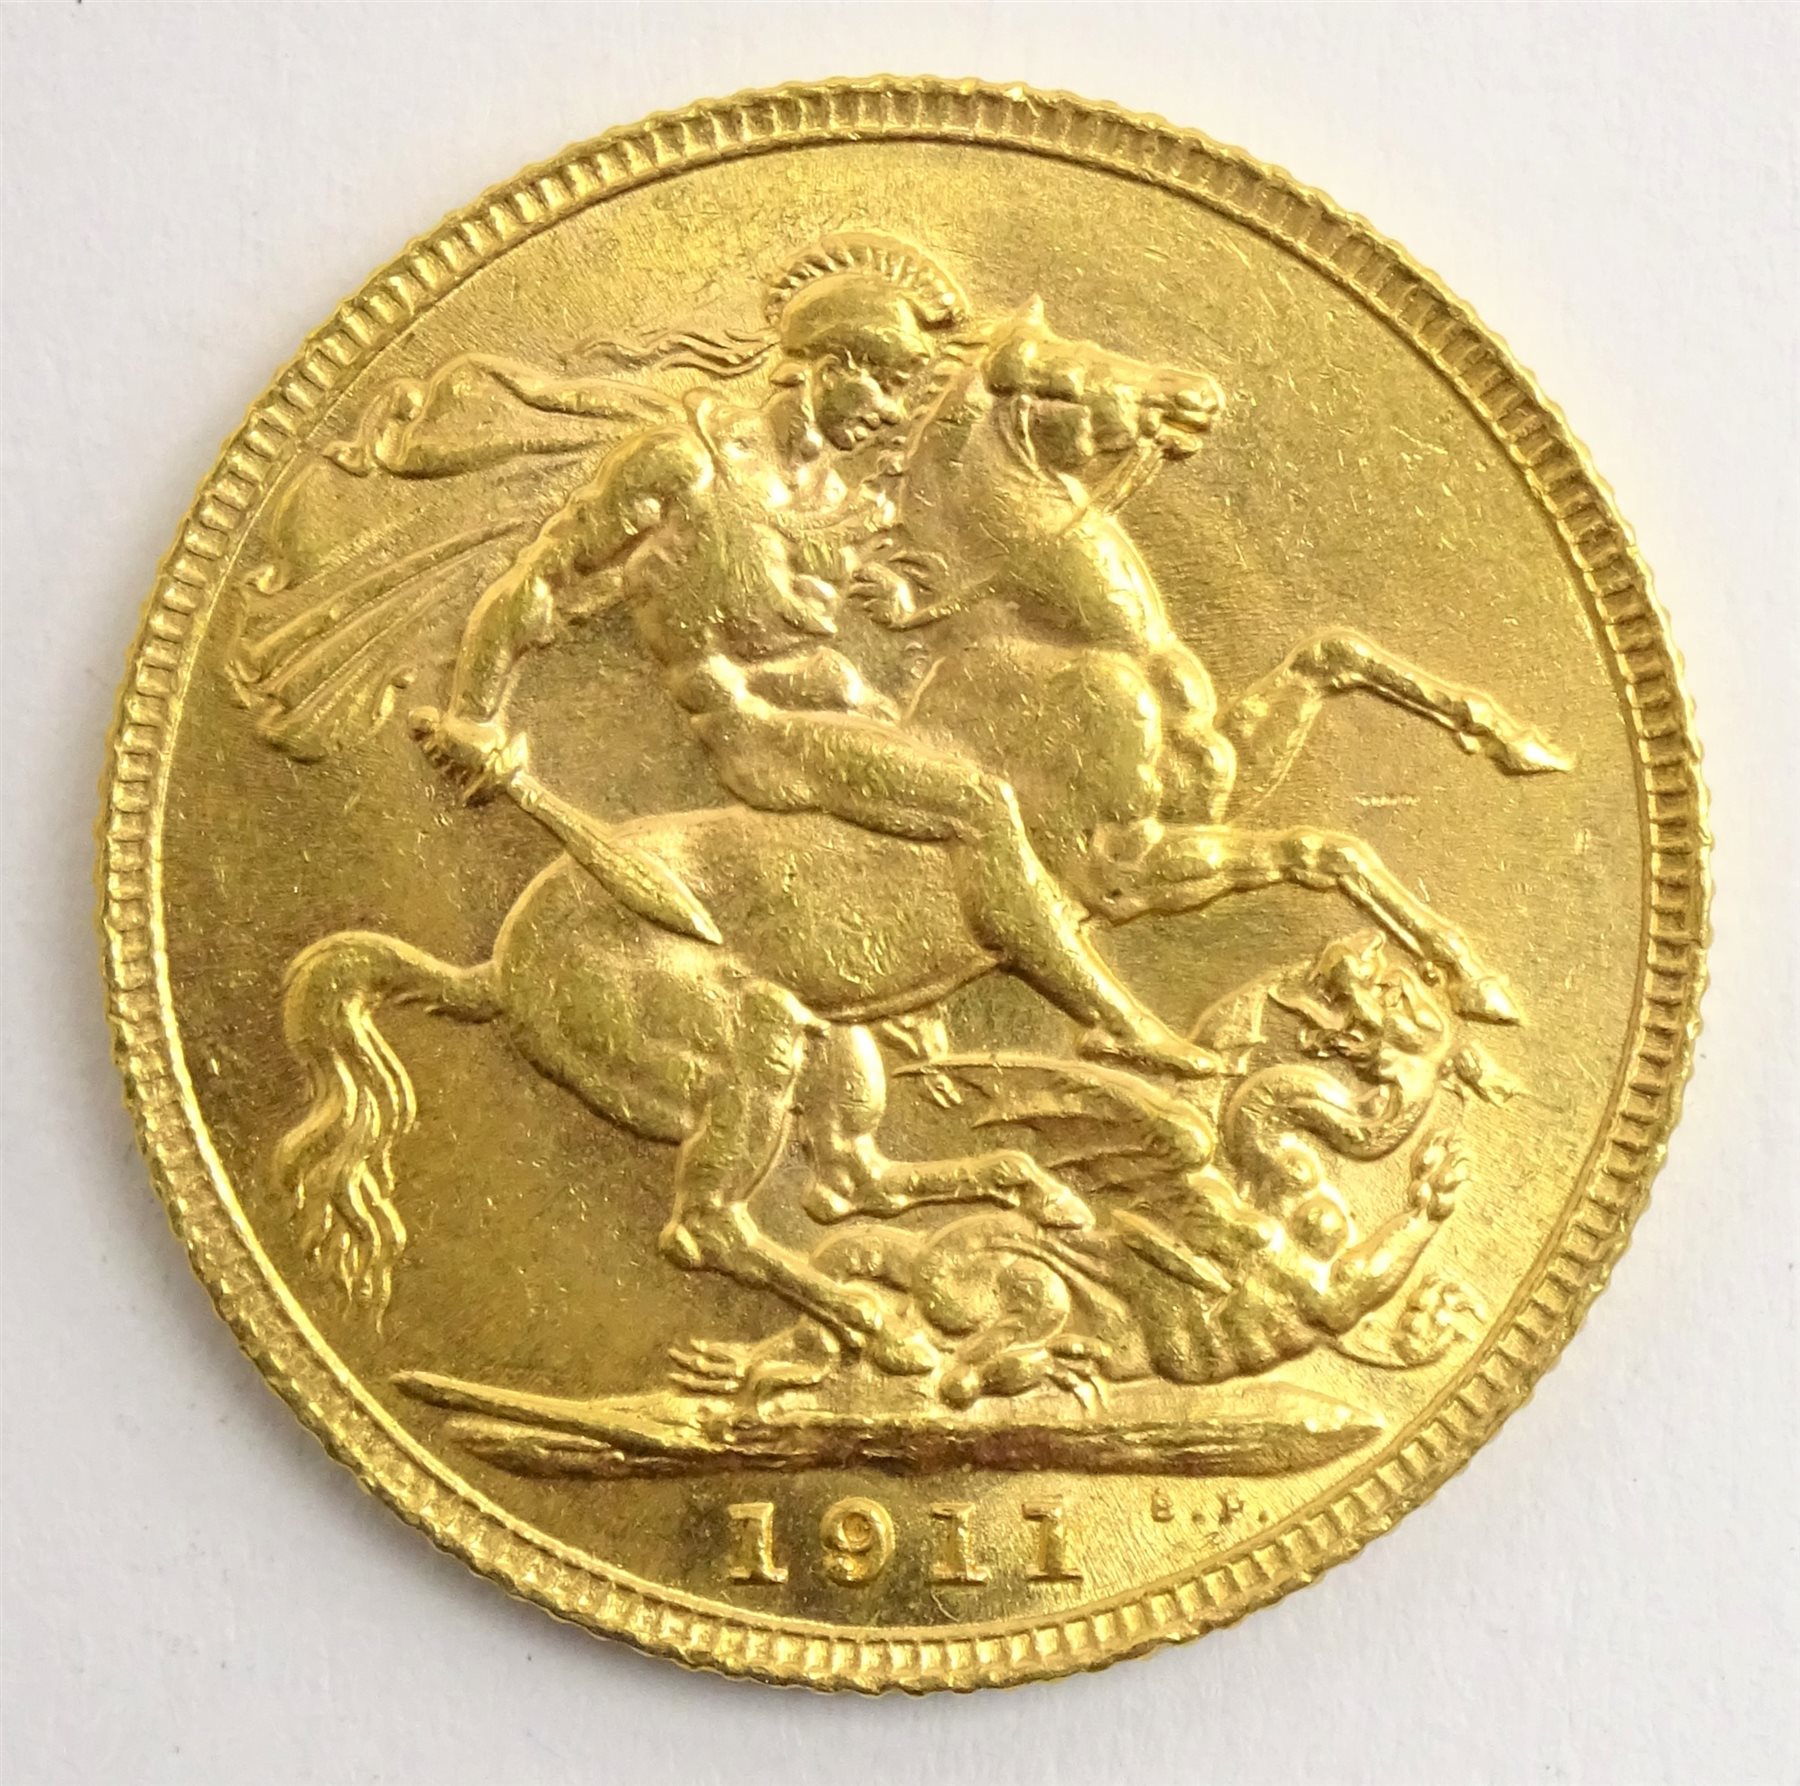 King George V 1911 Gold Full Sovereign Coins Banknotes And Stamps